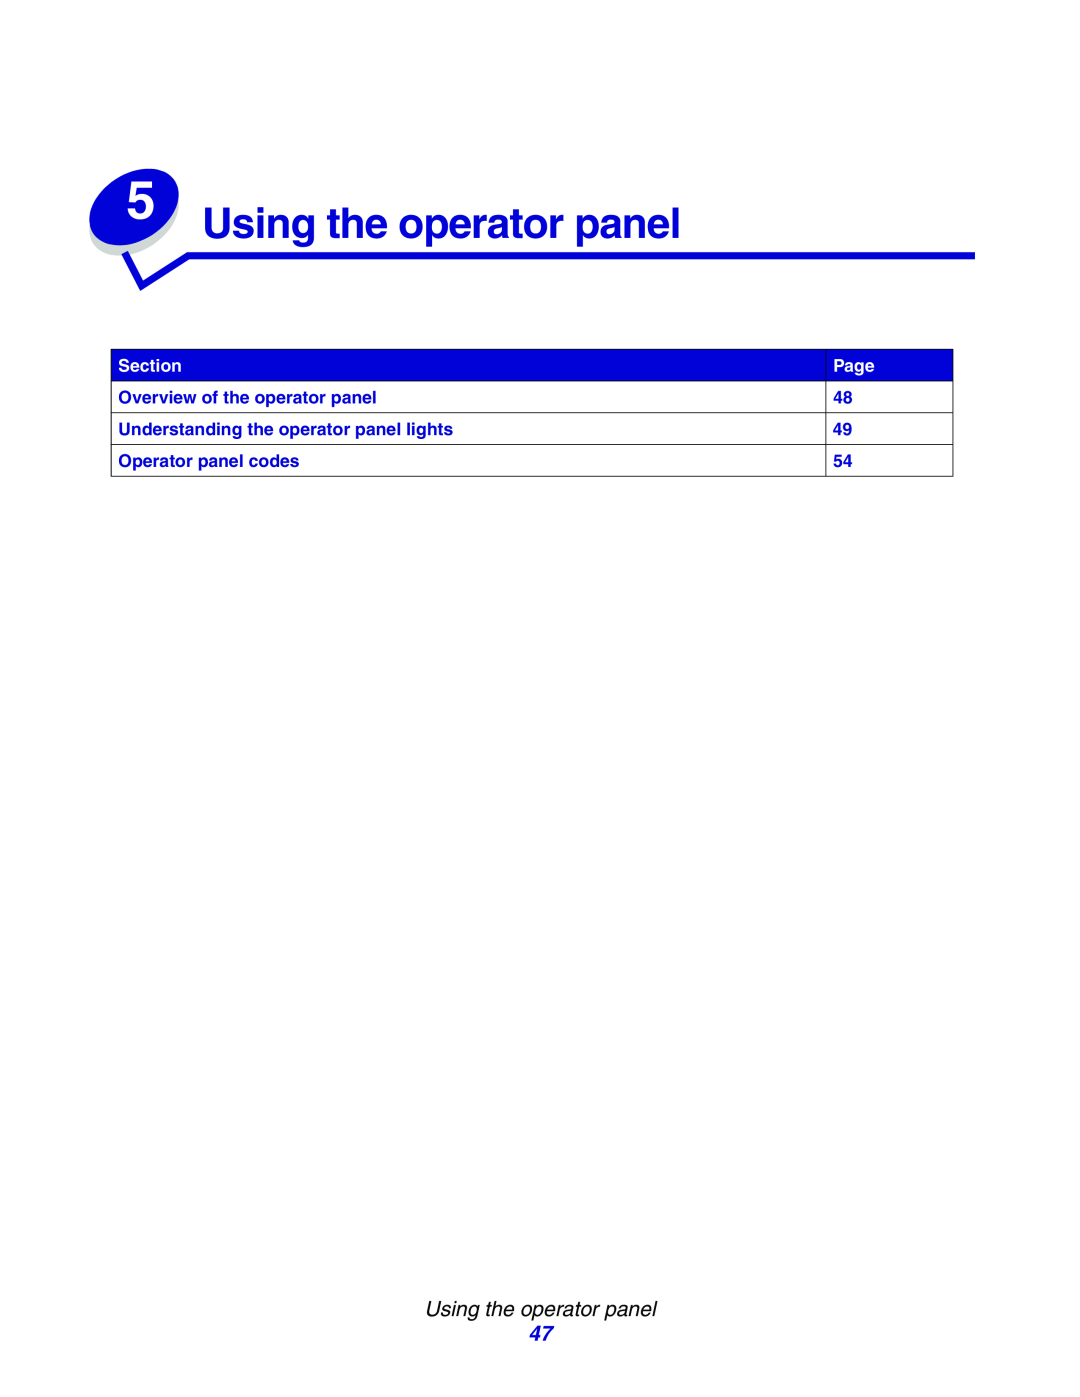 Lexmark E234N manual Using the operator panel, Section, Page 